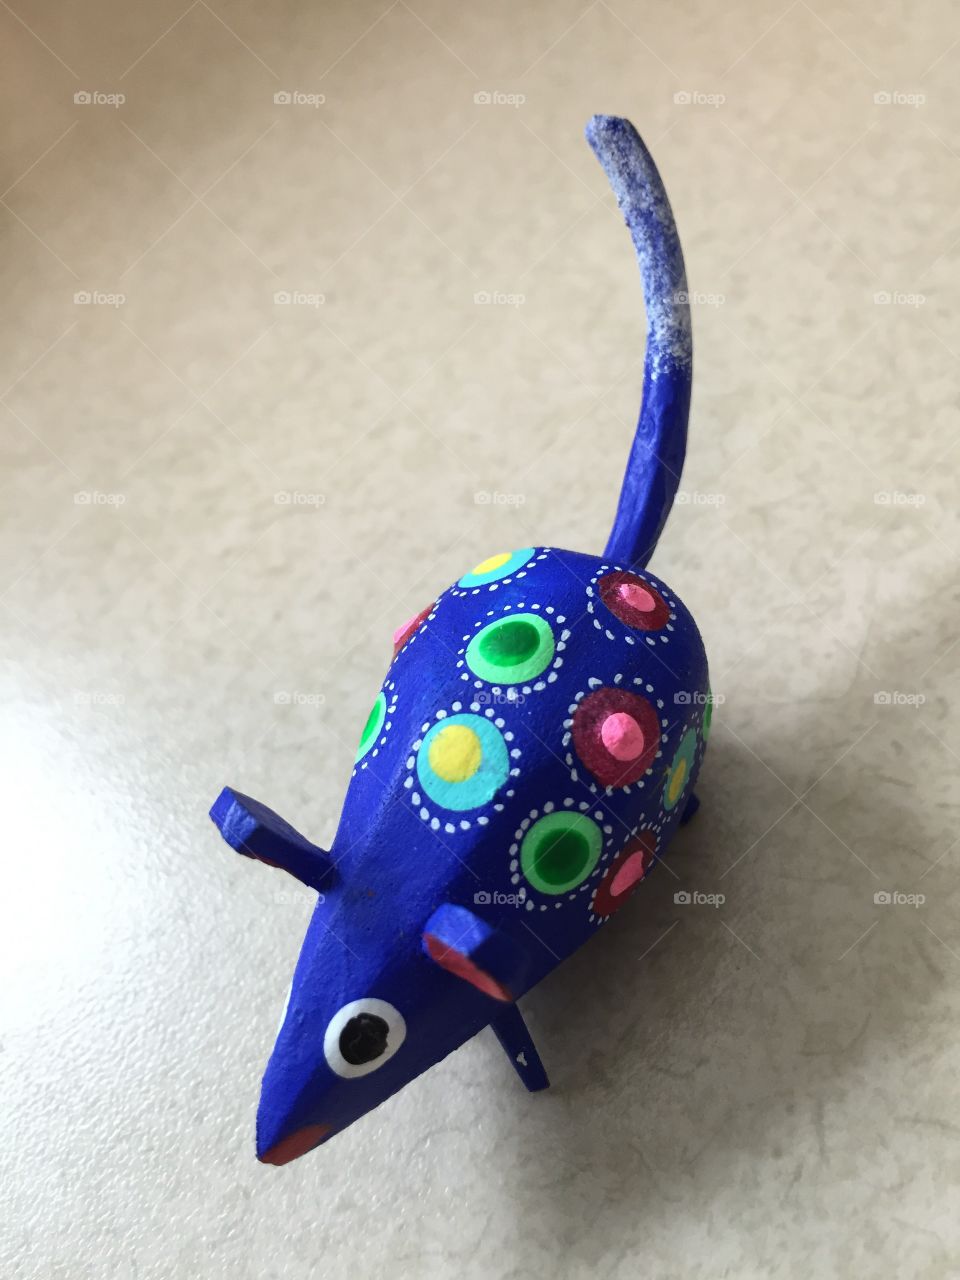 Mouse from Mexico